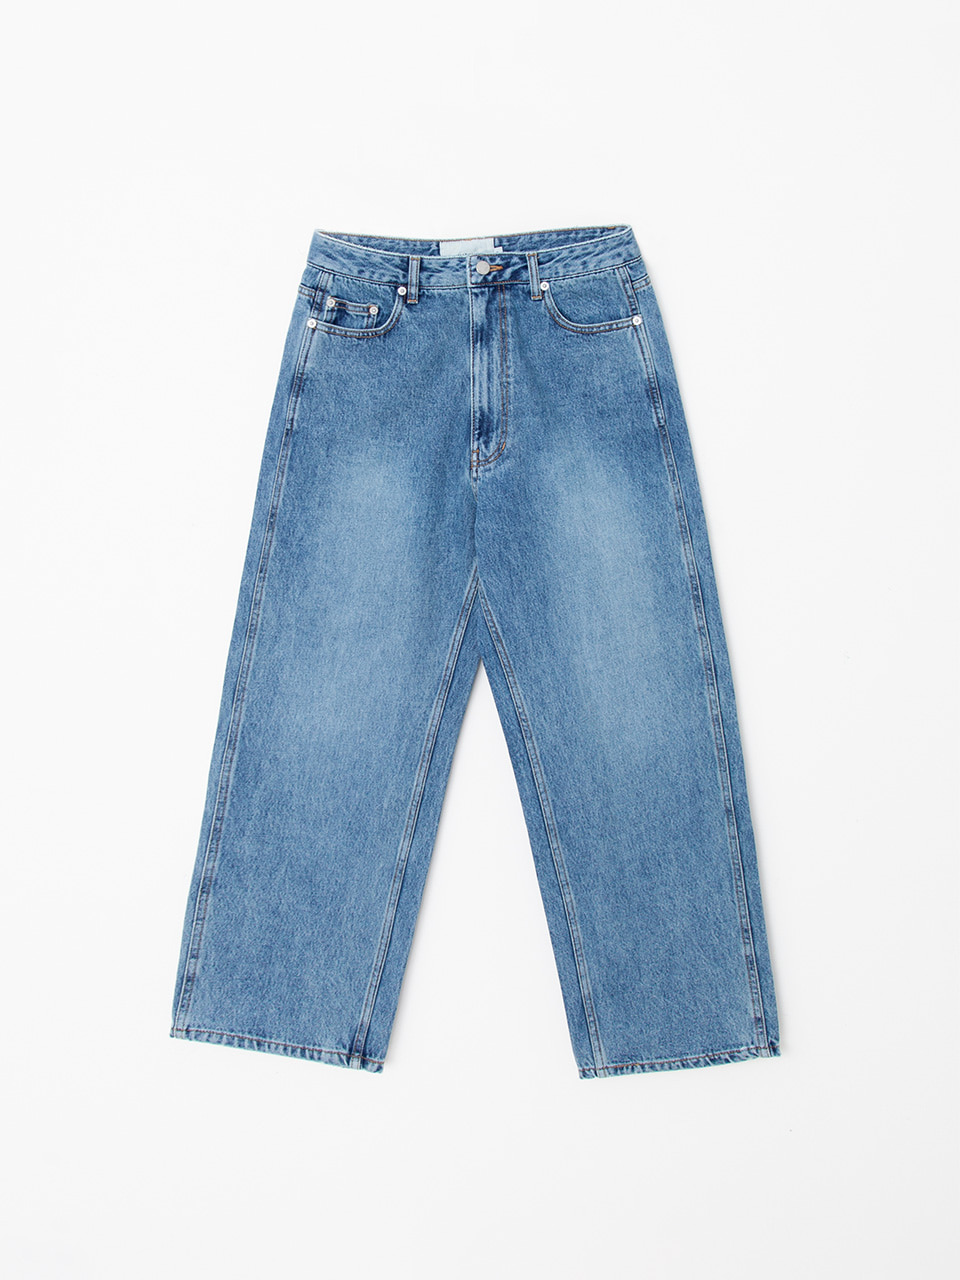 MATISSE THE CURATOR - WIDE DENIM PANTS (WASHED)